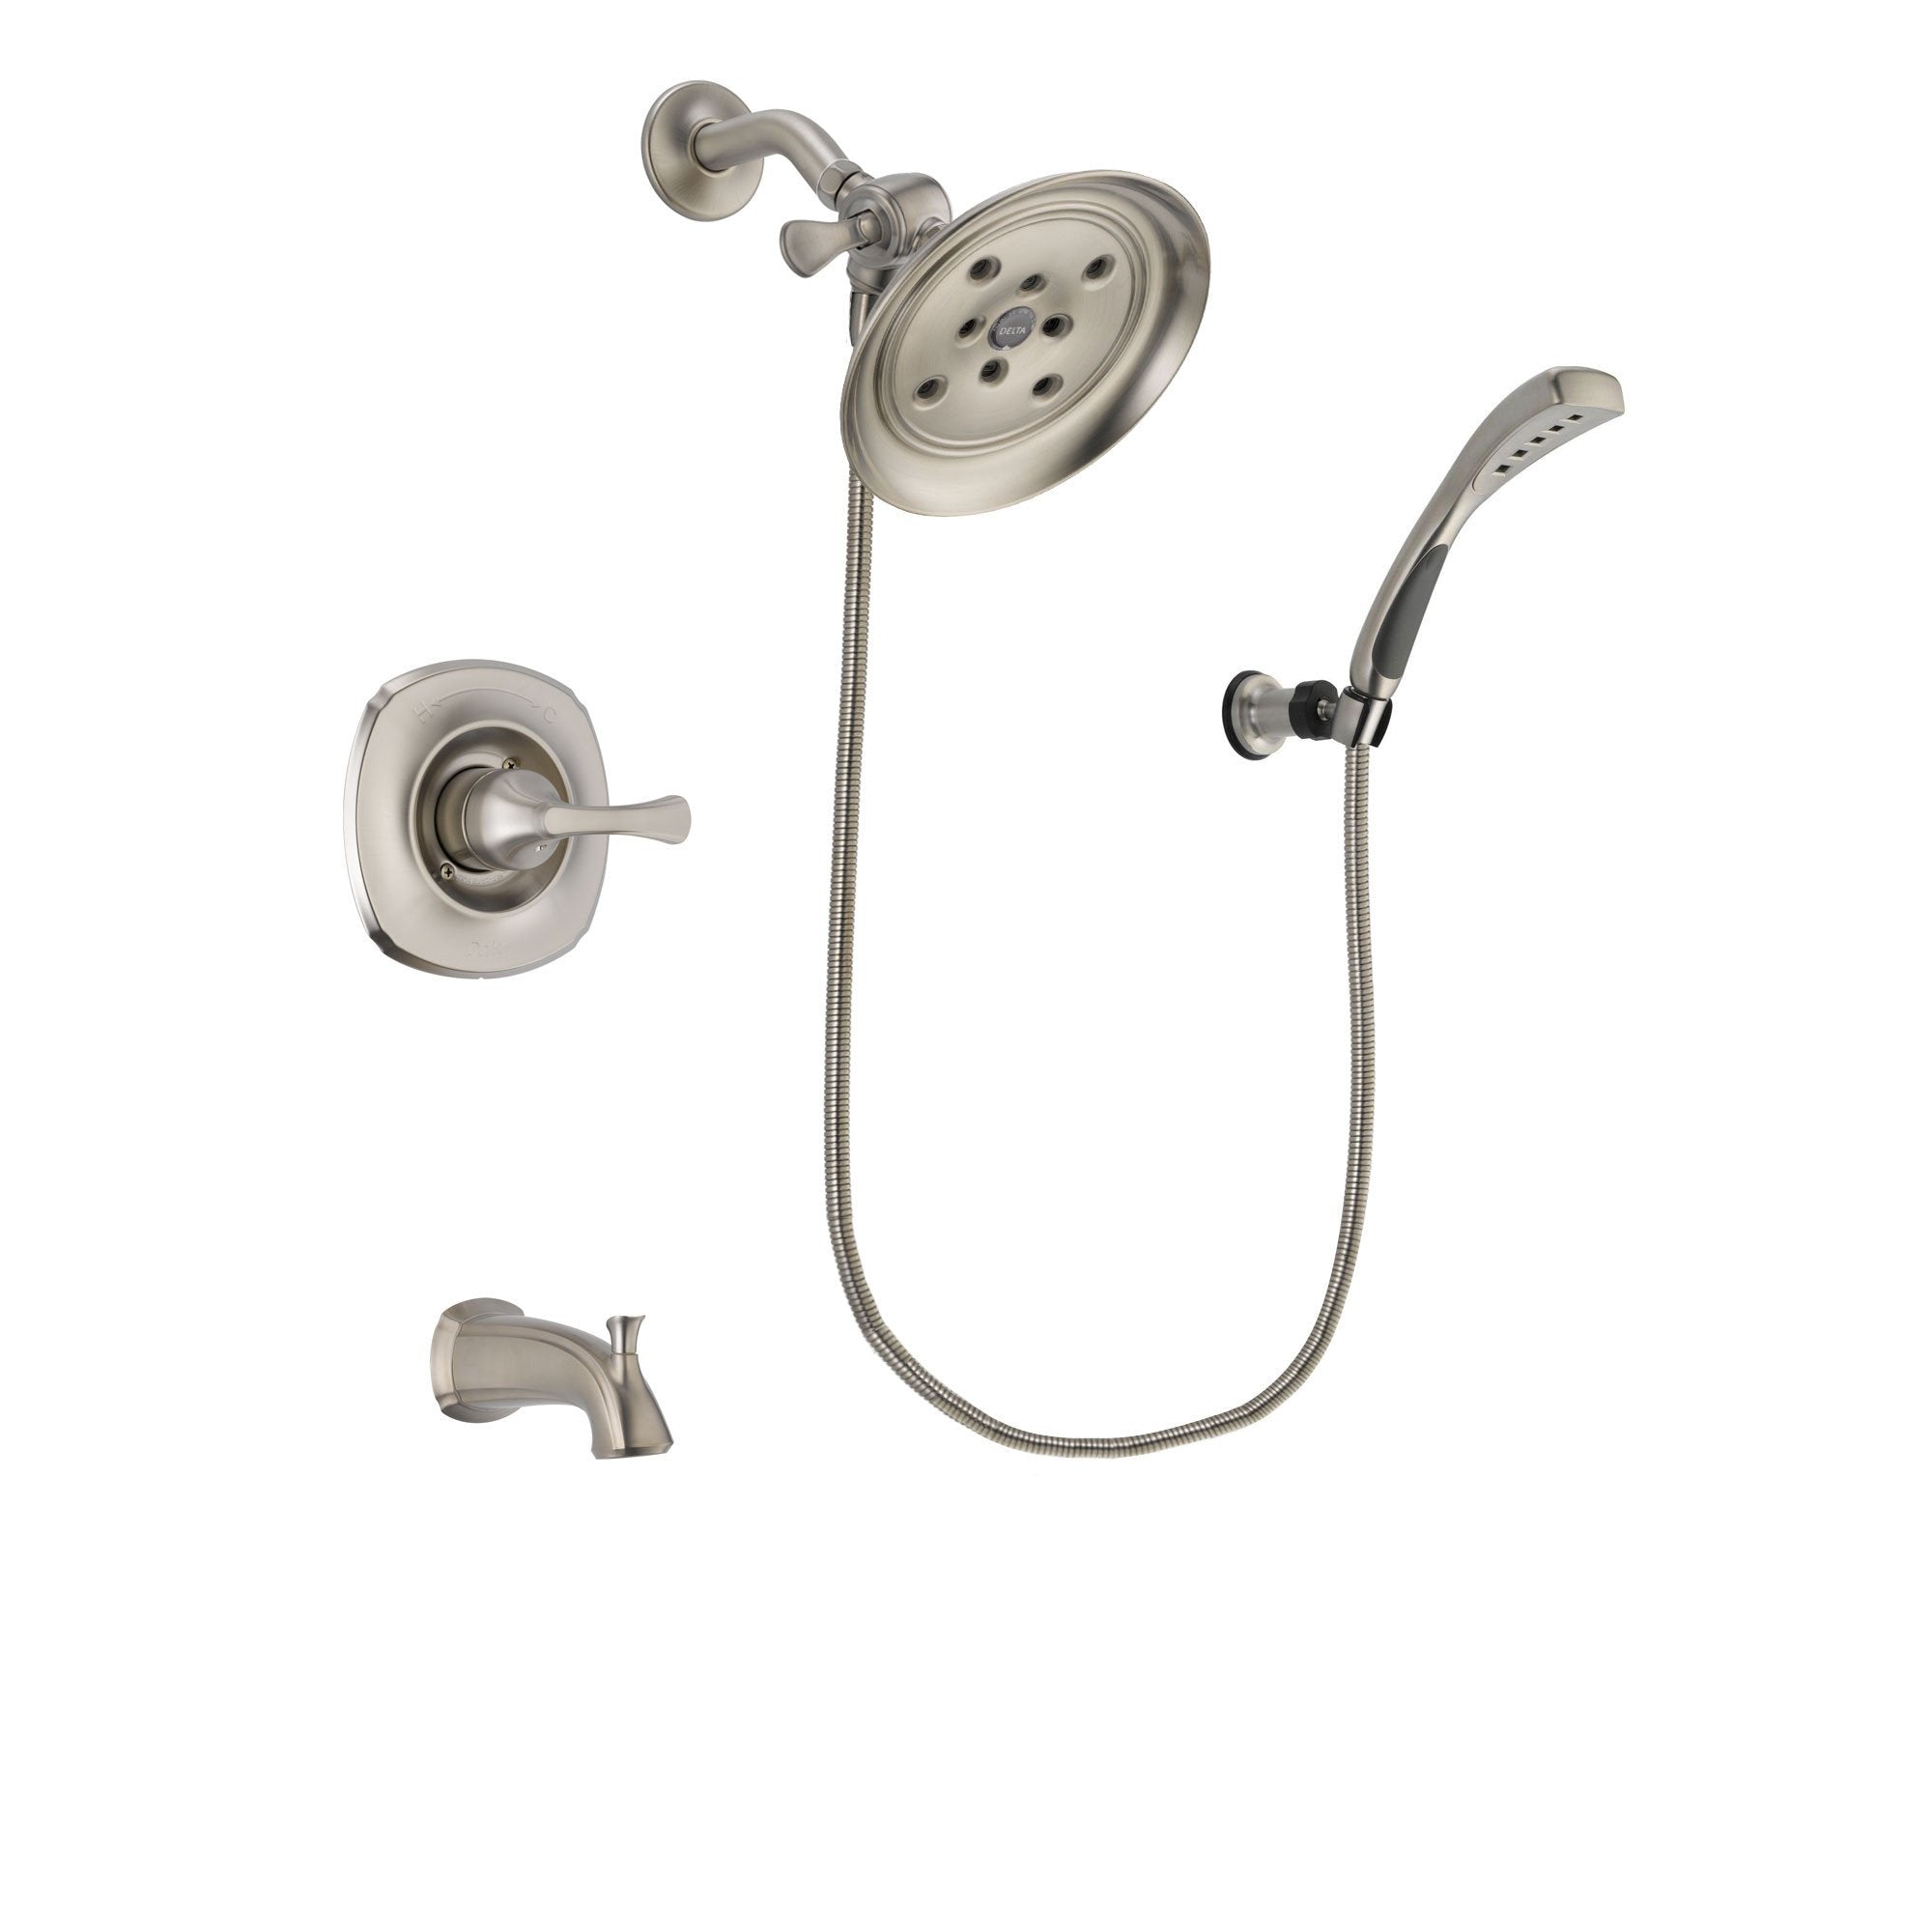 Delta Addison Stainless Steel Finish Tub and Shower Faucet System Package with Large Rain Showerhead and Wall Mounted Handshower Includes Rough-in Valve and Tub Spout DSP1869V